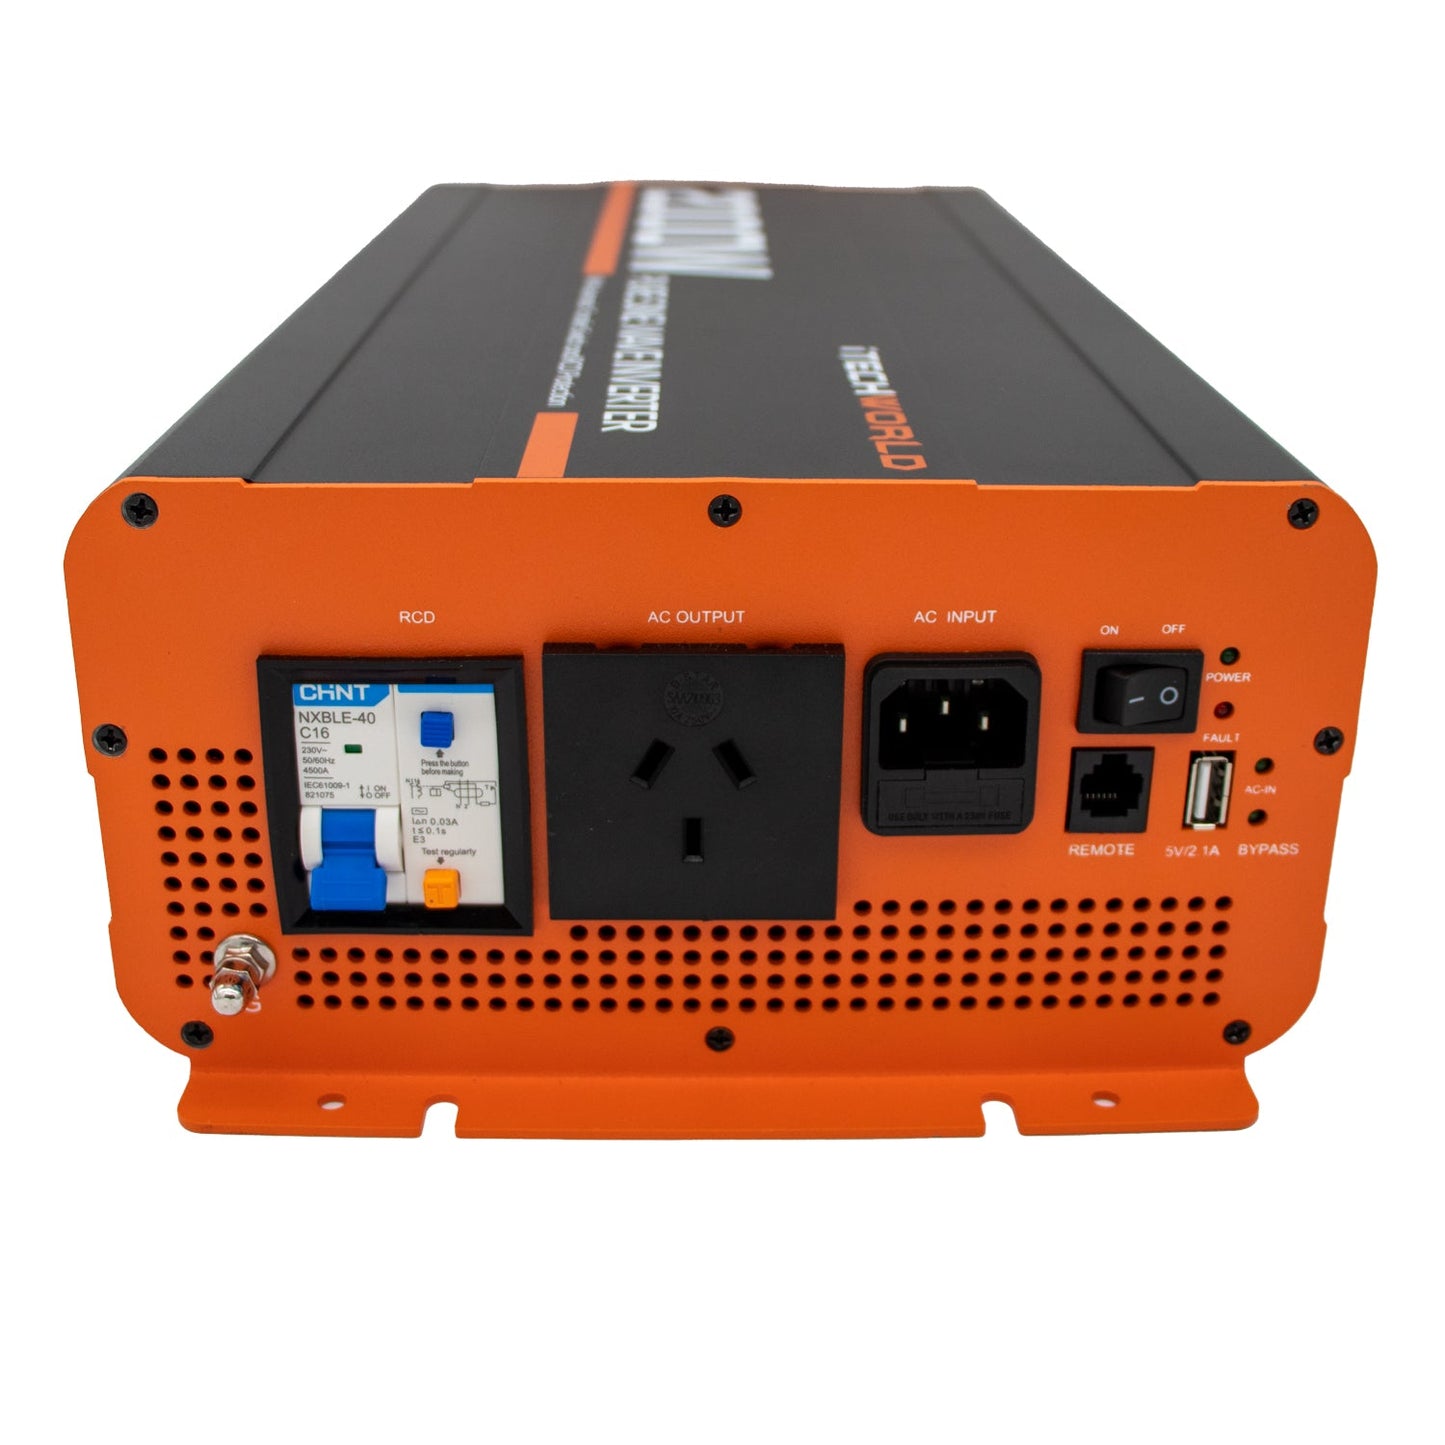 2000 Watt Pure Sine Wave Inverter with ATS and RCD